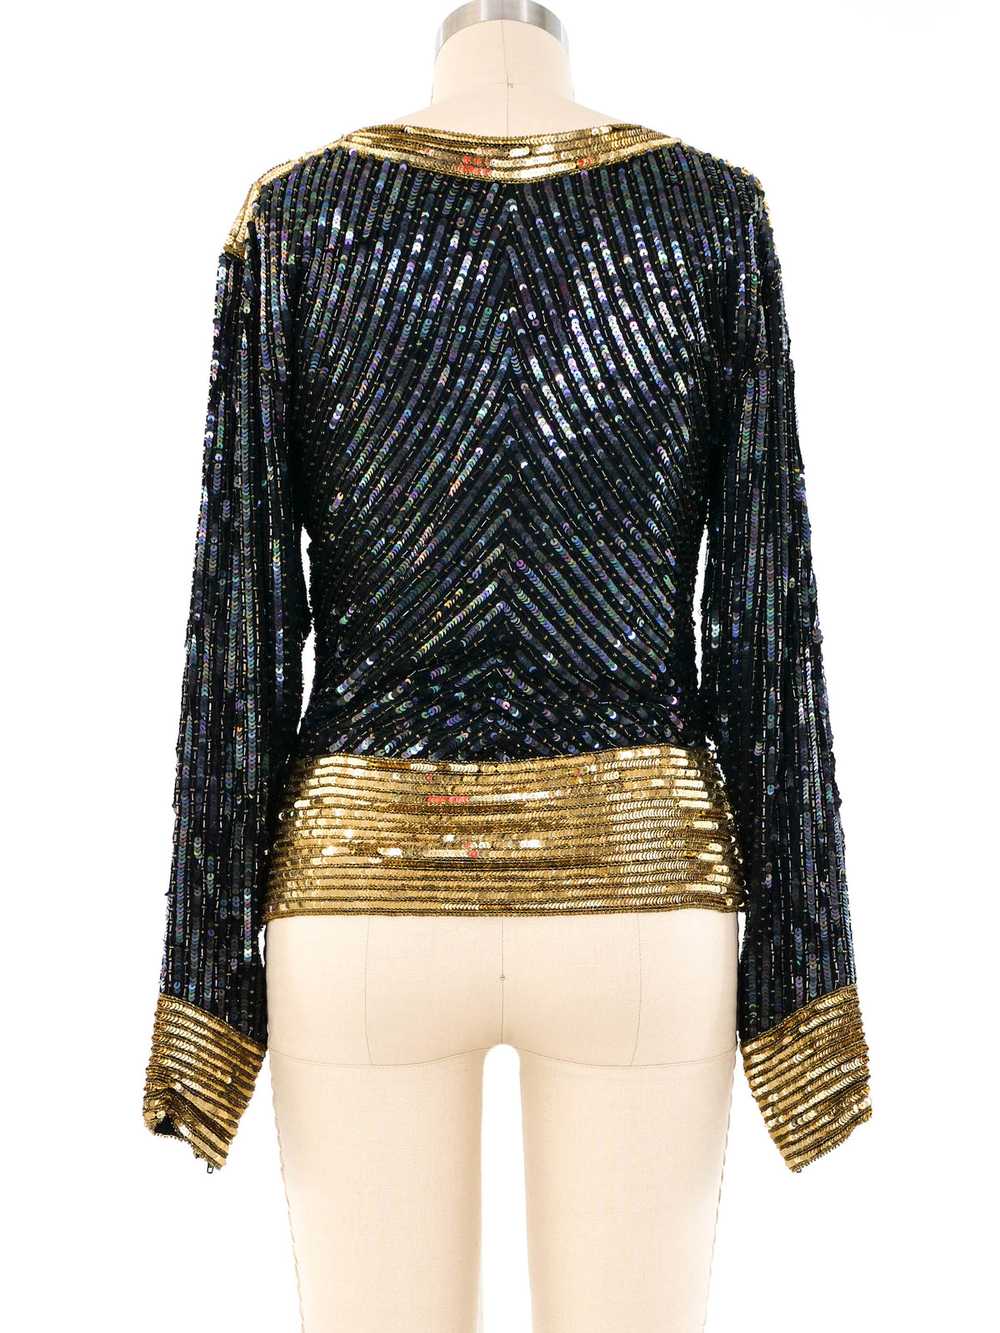 Yves Saint Laurent Black and Gold Sequin Top - image 4